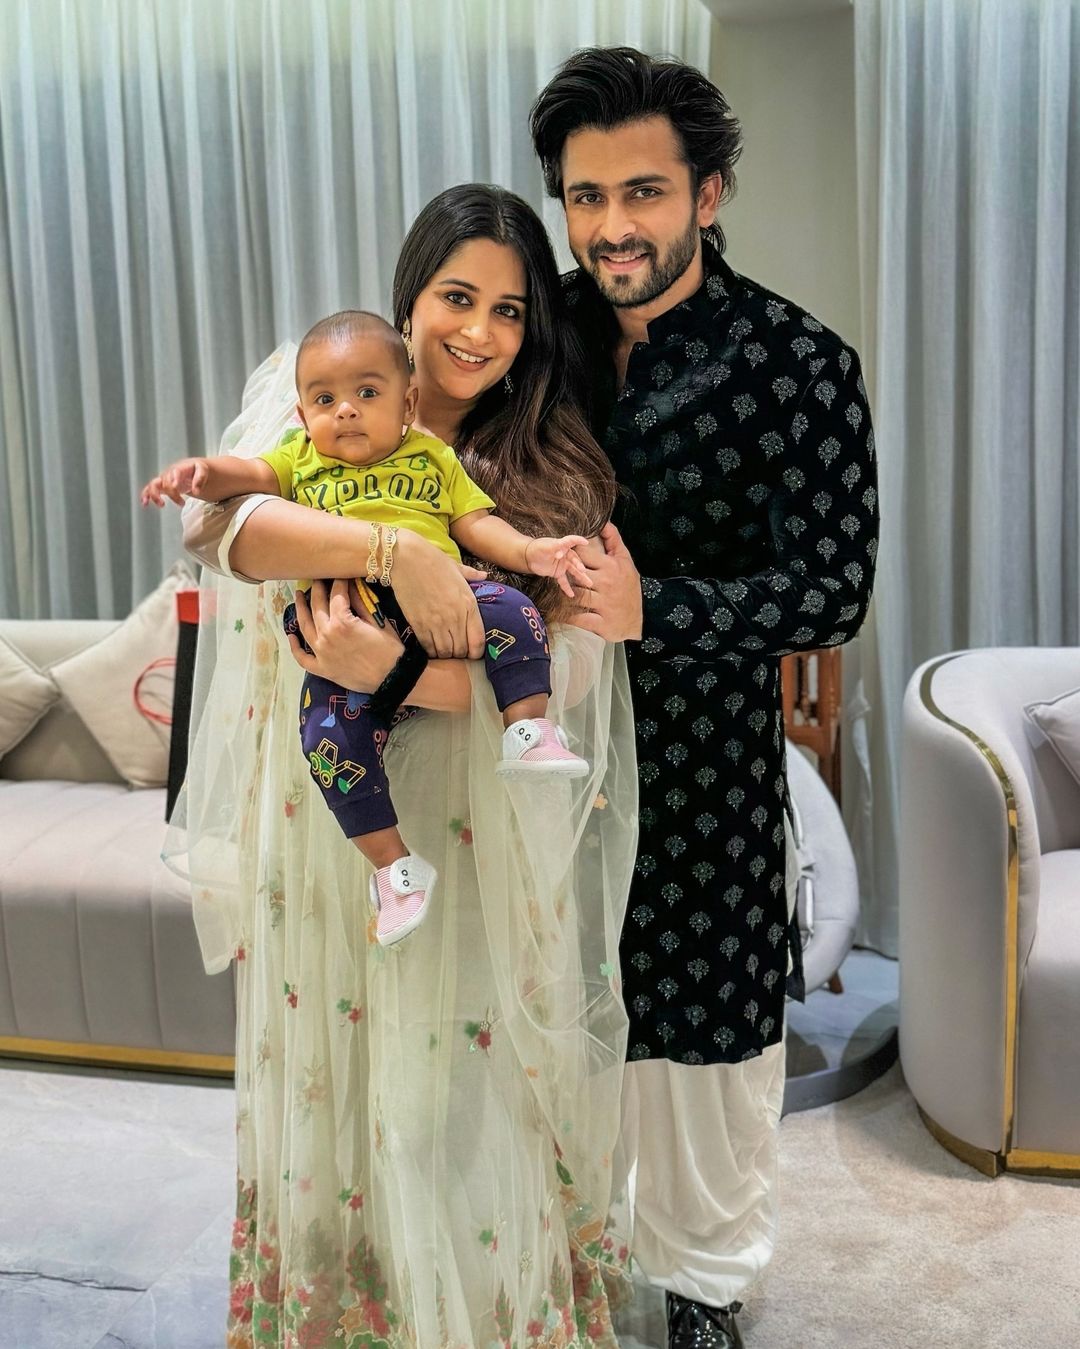 Actress Dipika Kakar And Shoaib’s Family Celebrated Their Son’s 6th Month Birthday Cheerfully. They Shared A Video Of Feeding Medicine To Ruhaan For The First Time